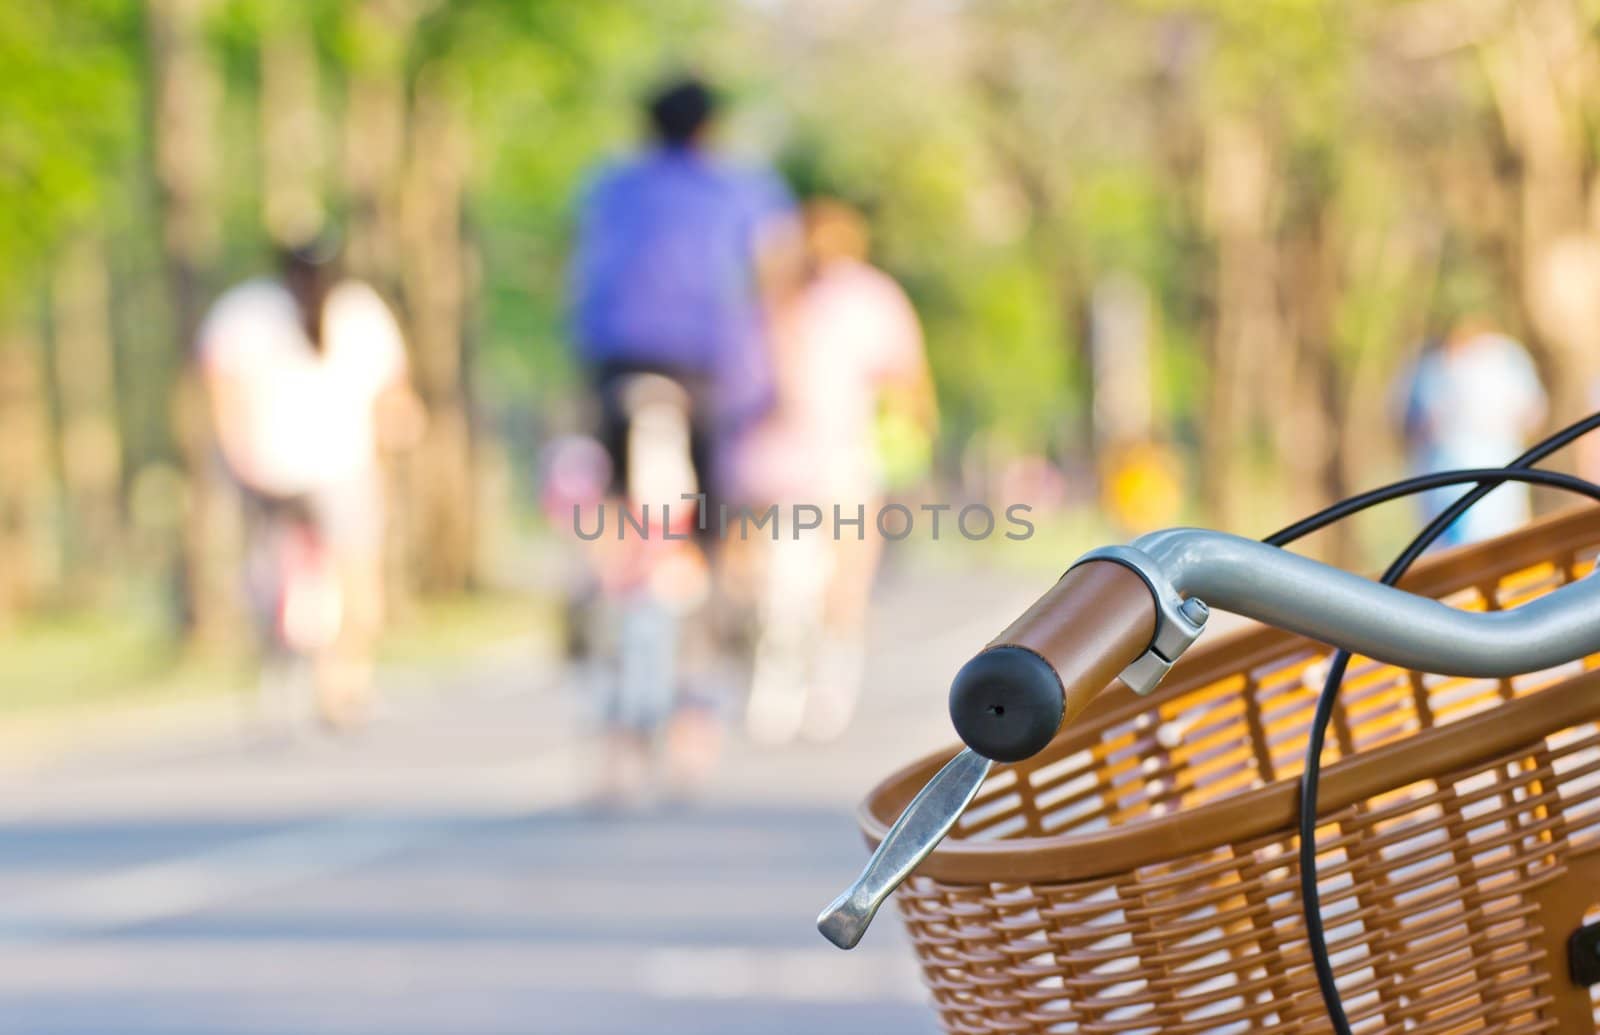 Bicycle in the park